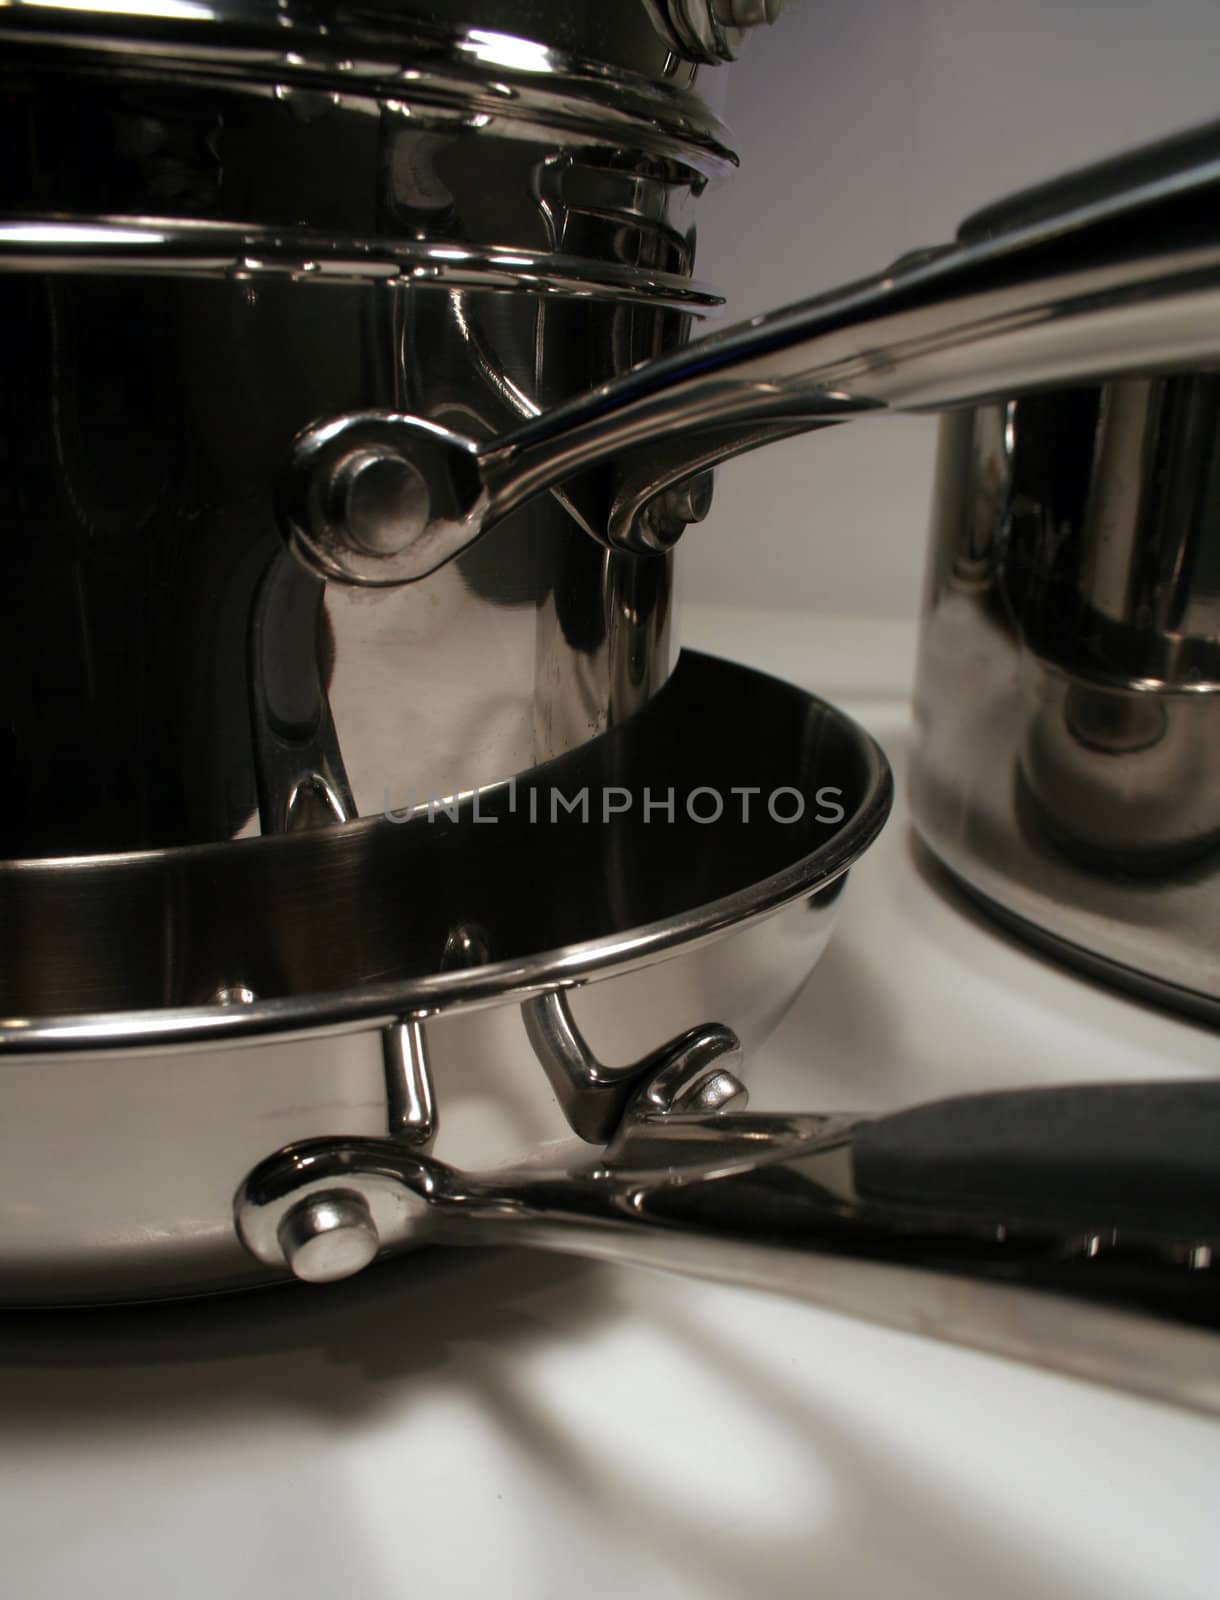 A pile of stainless steel pots and pans on white.
